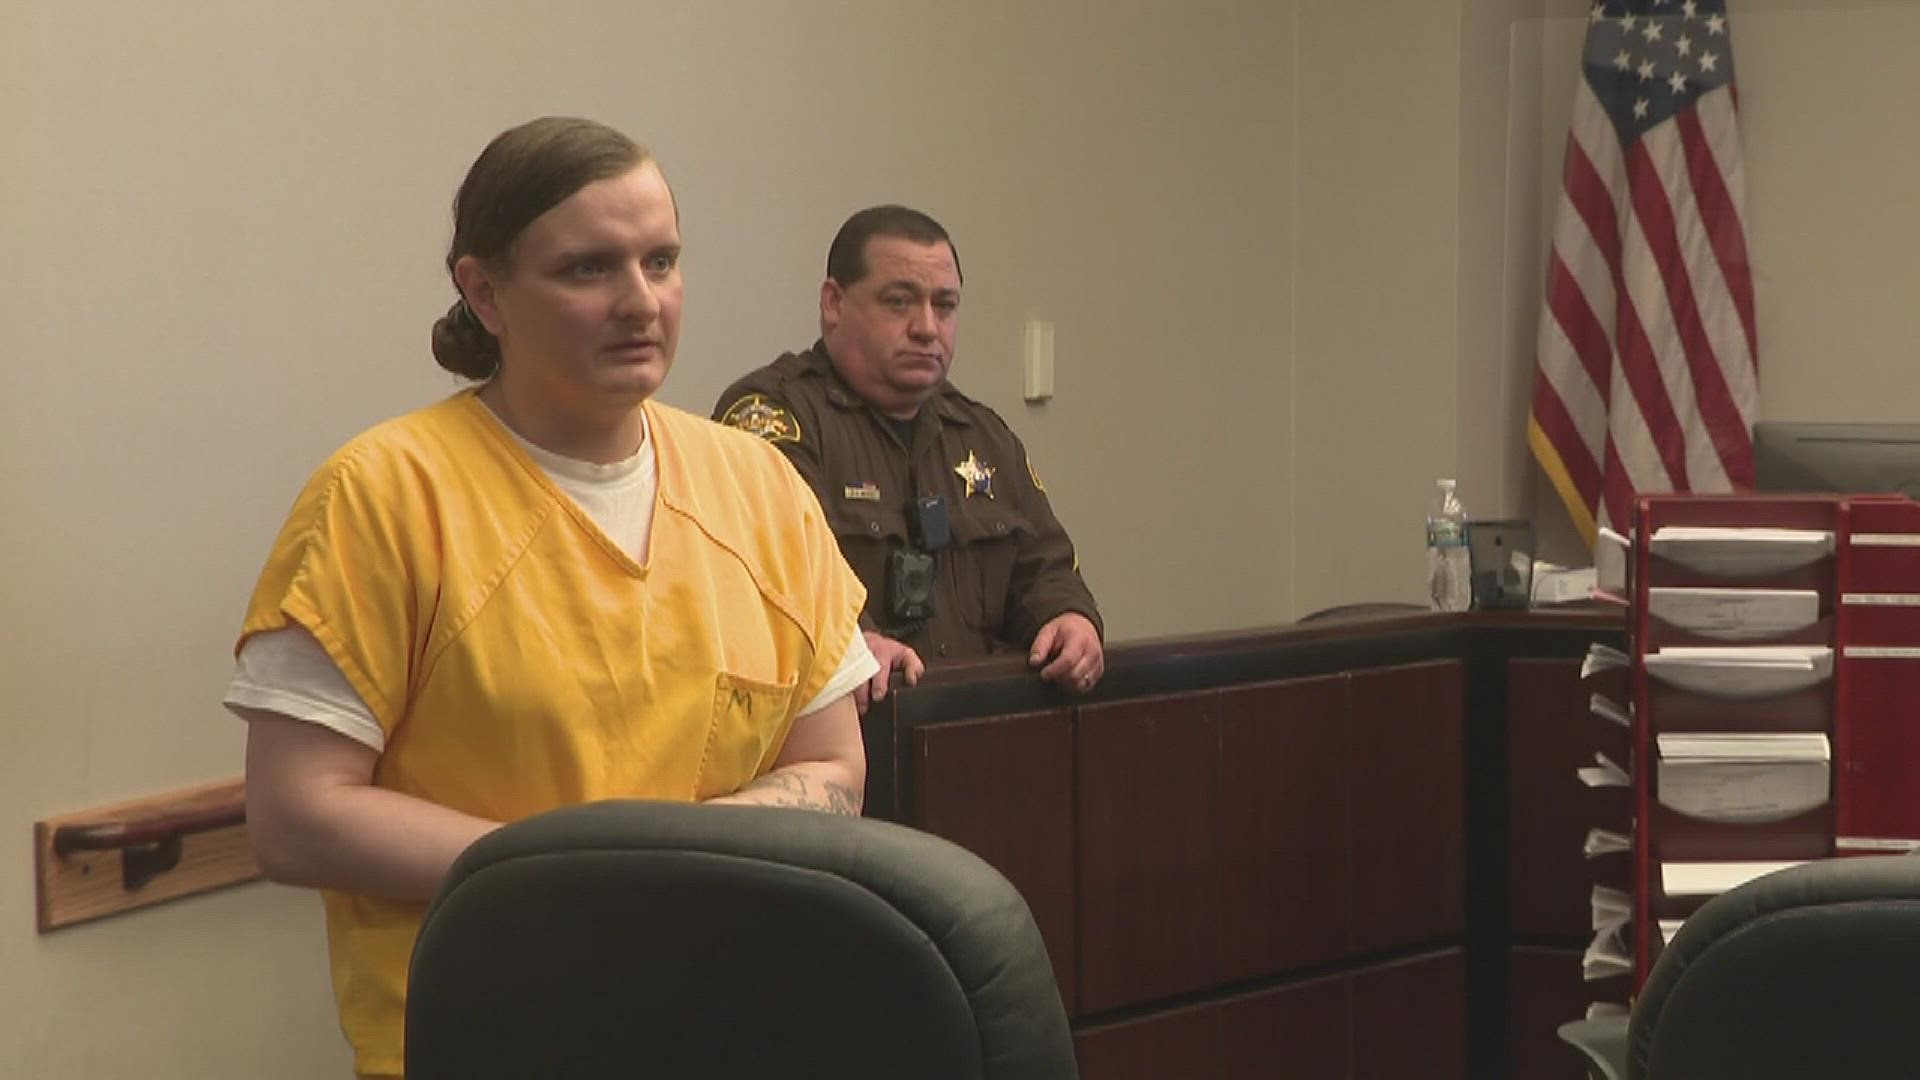 Harli Quinn received a 45-year sentence for the 2005 murder of Adrianne Reynolds. A judge denied her appeal for a shorter sentence Wednesday.